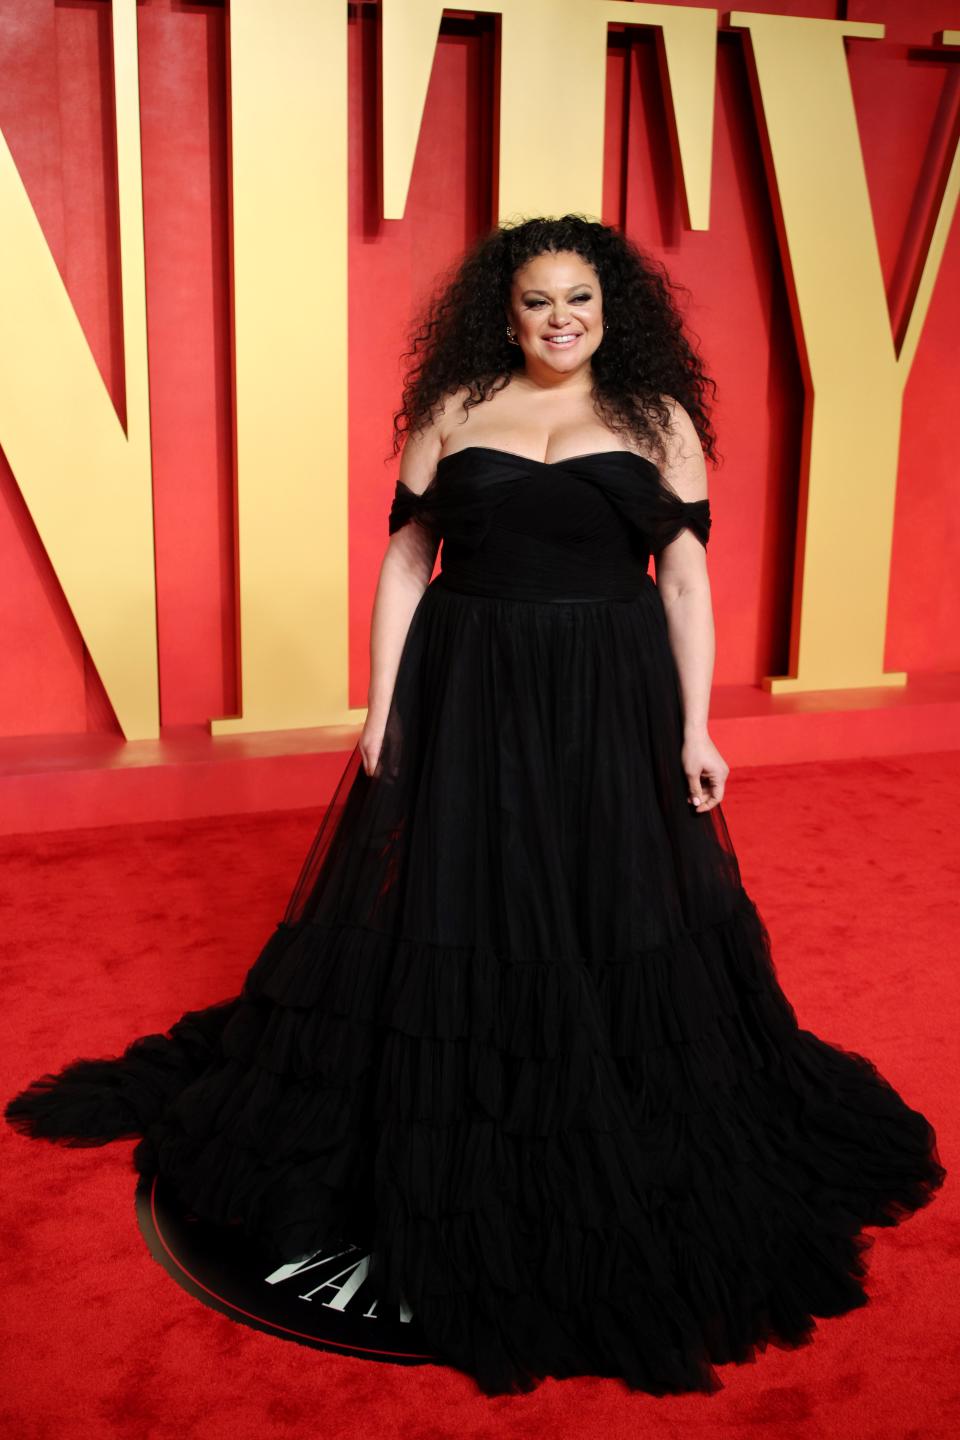 Image may contain: Michelle Buteau, Fashion, Adult, Person, Clothing, Dress, Premiere, and Red Carpet